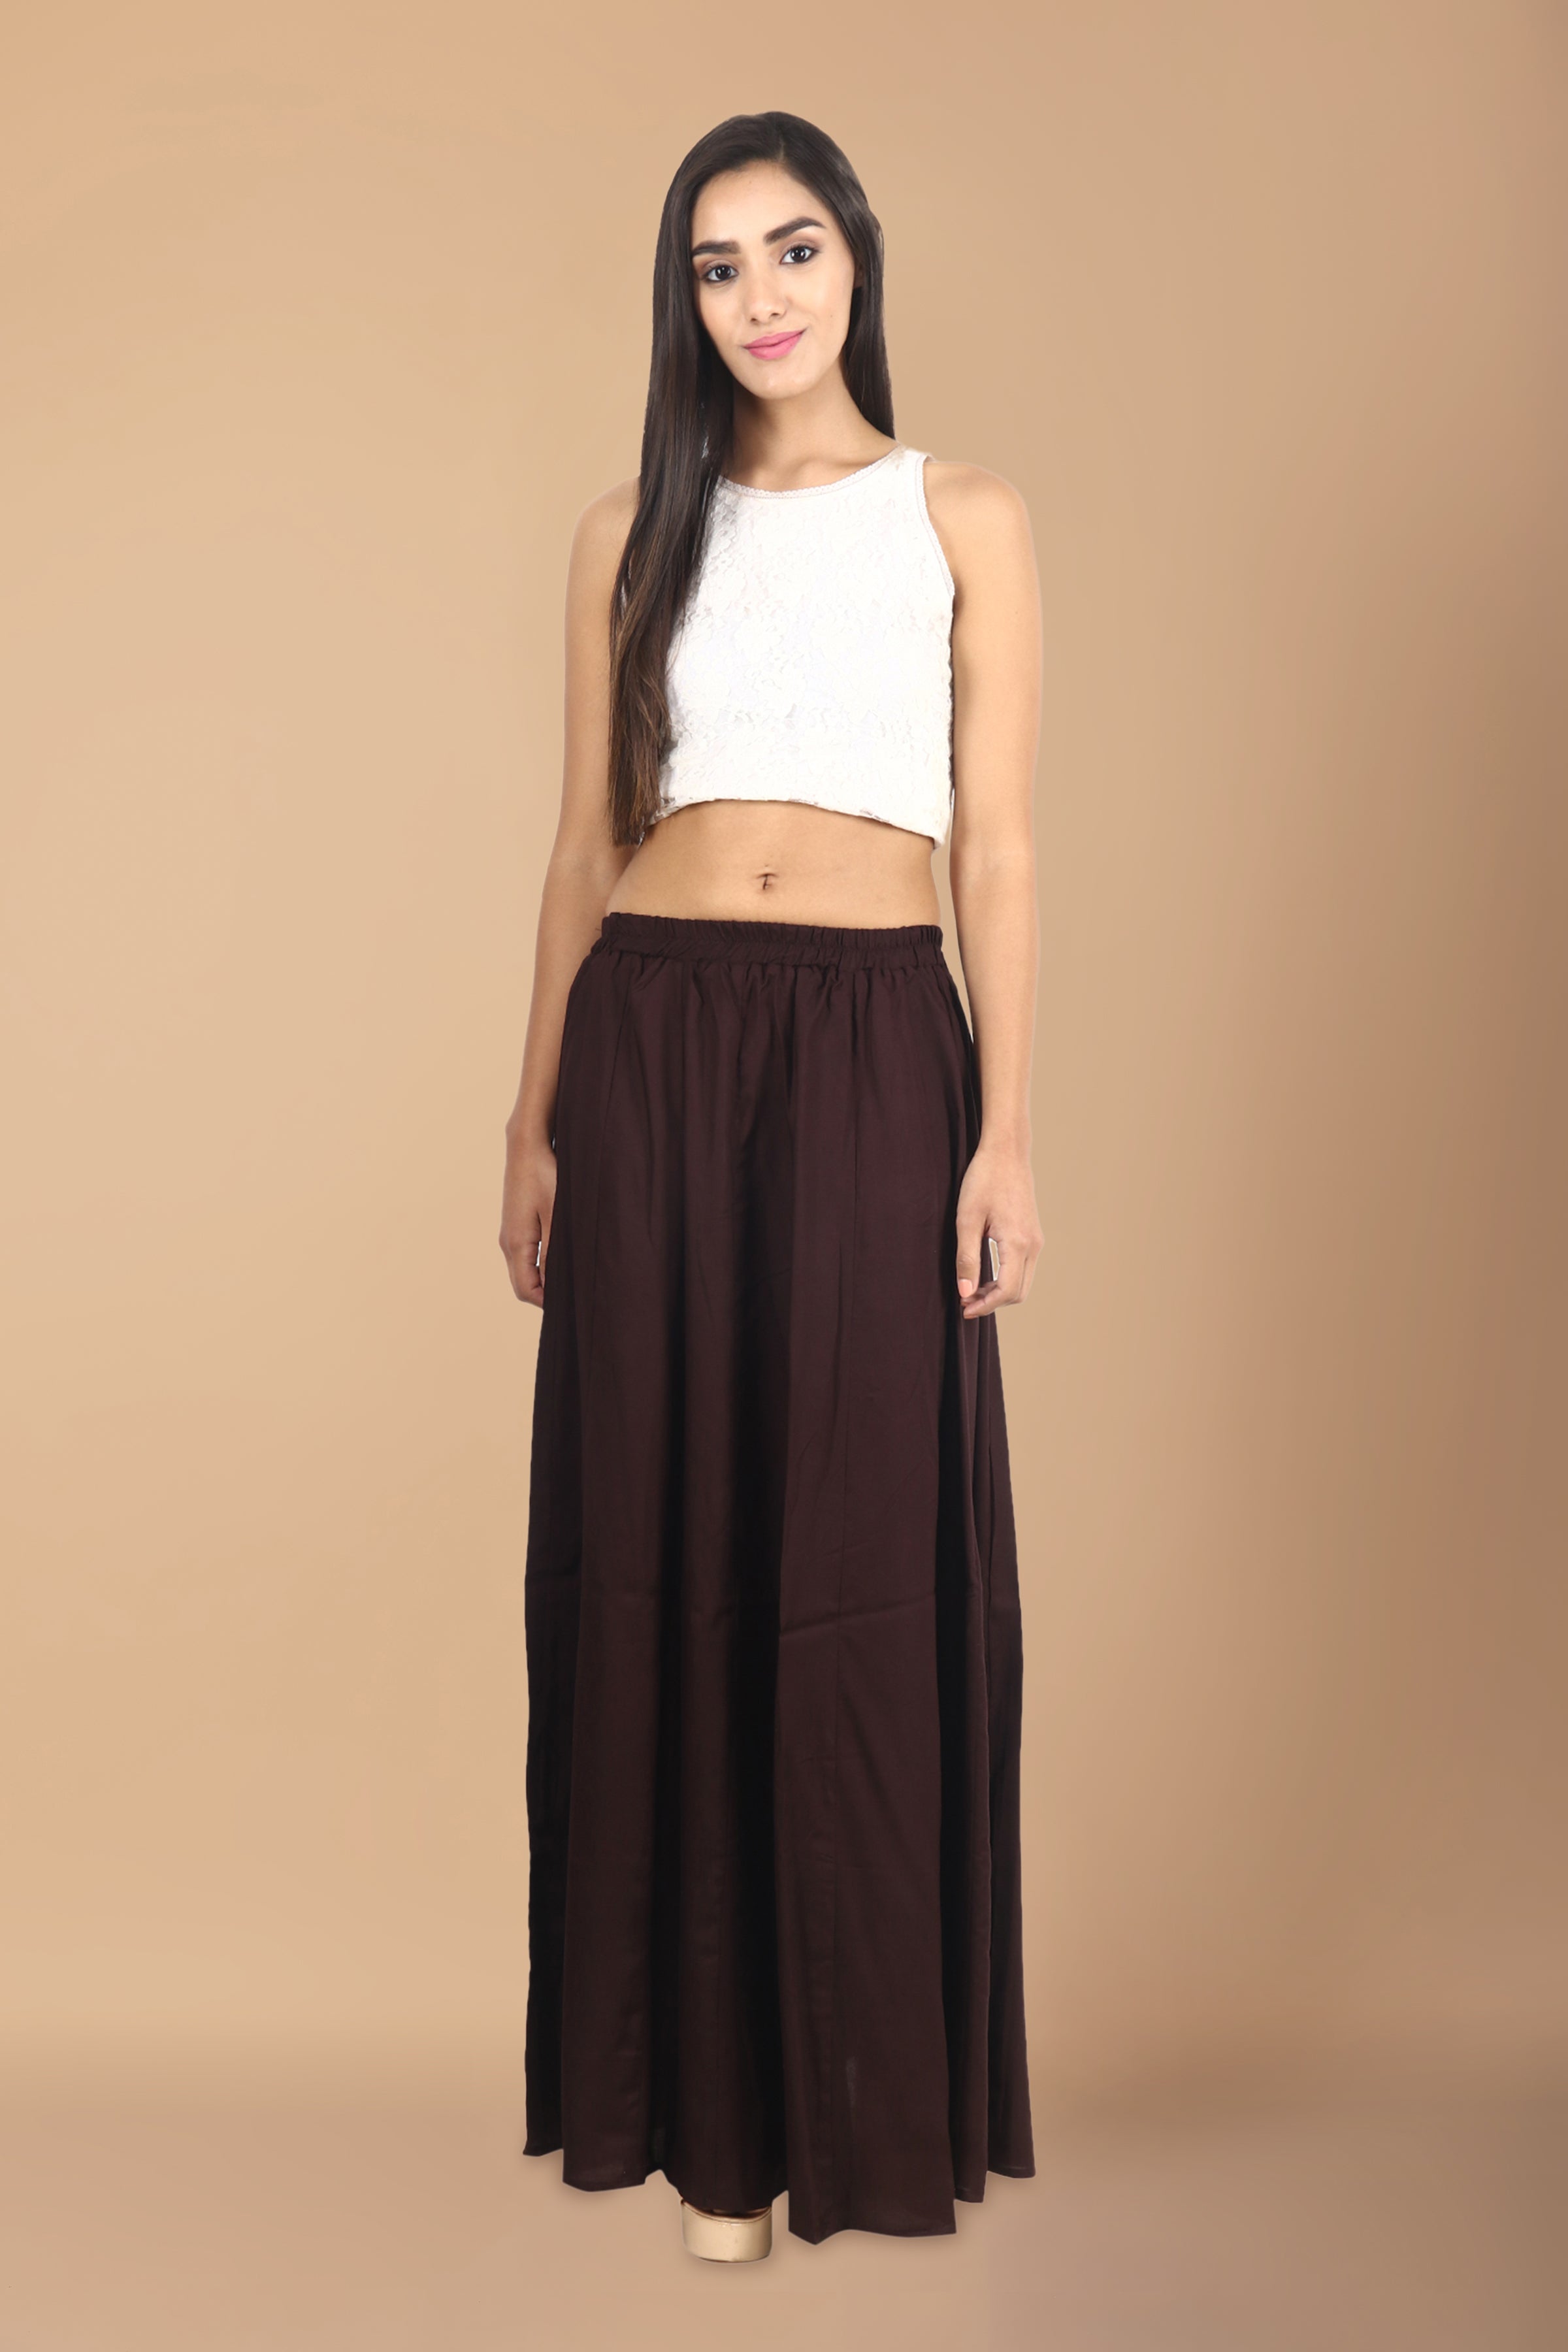 Palazzo Pants- Modern Bottoms that Go with Every Top Style –  shoppingwithattitude